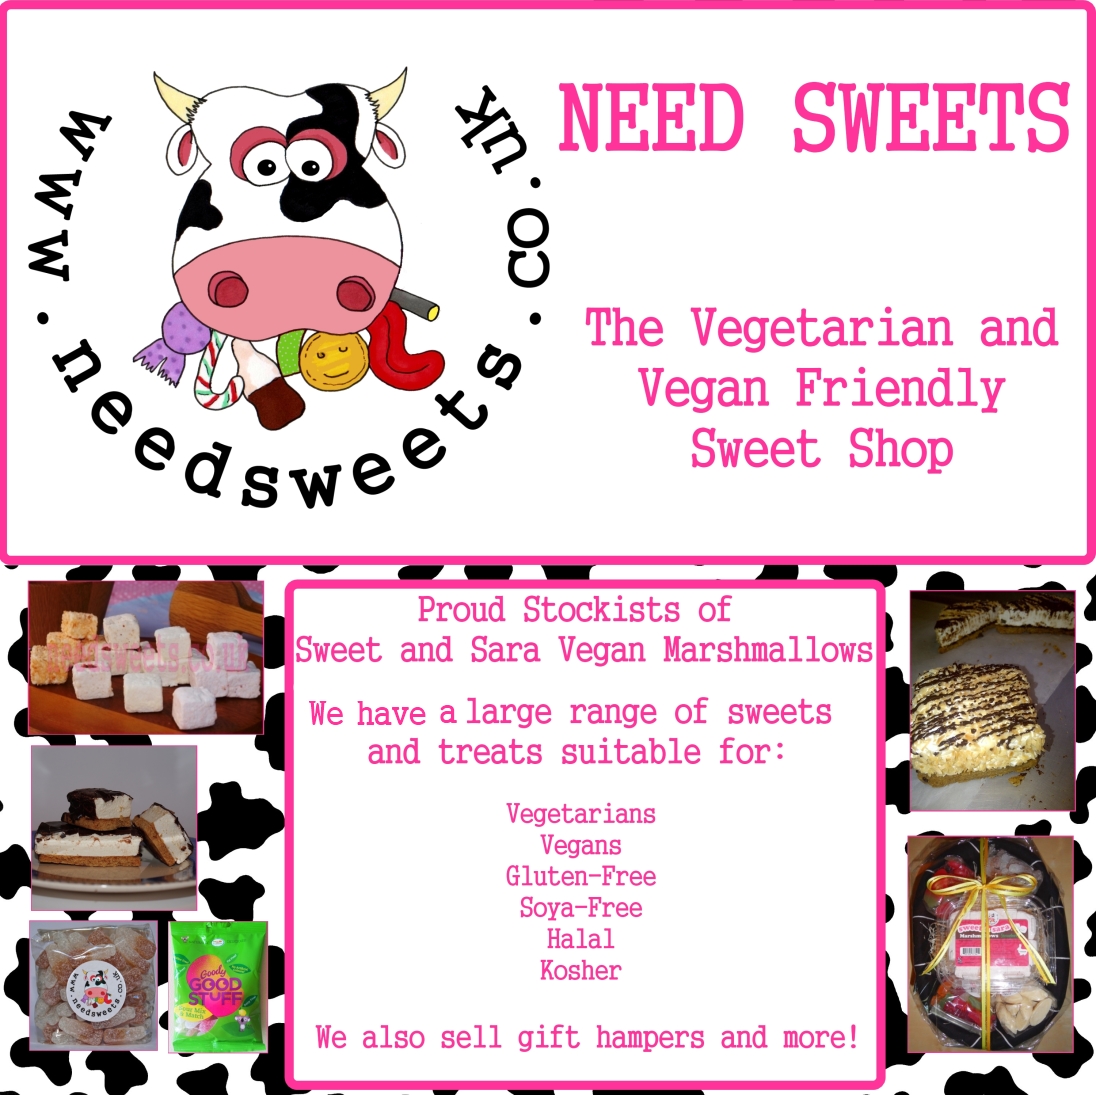 needsweets.co.uk - Vegetarian and vegan sweets, marshmallows, gifts and more